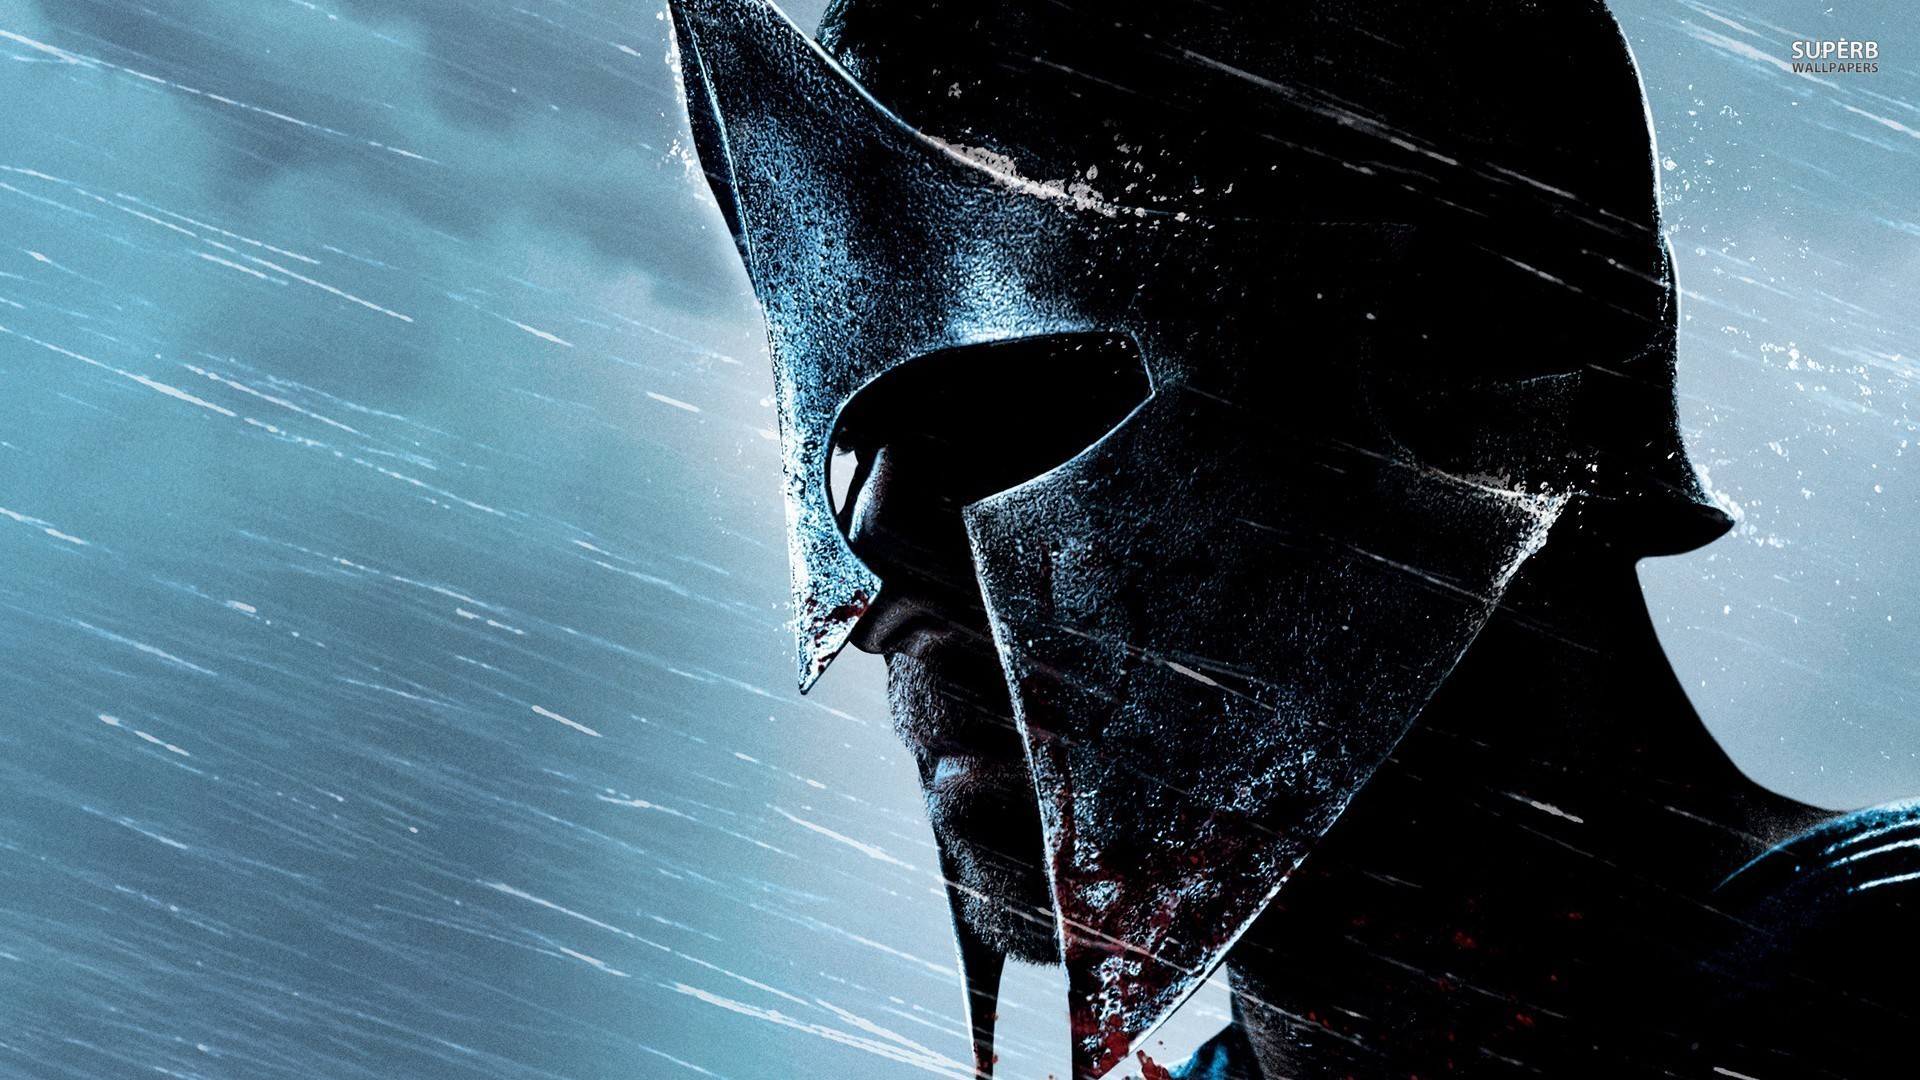 Spartan Wallpaper Hd For Android Apk - Warrior In The Rain - HD Wallpaper 